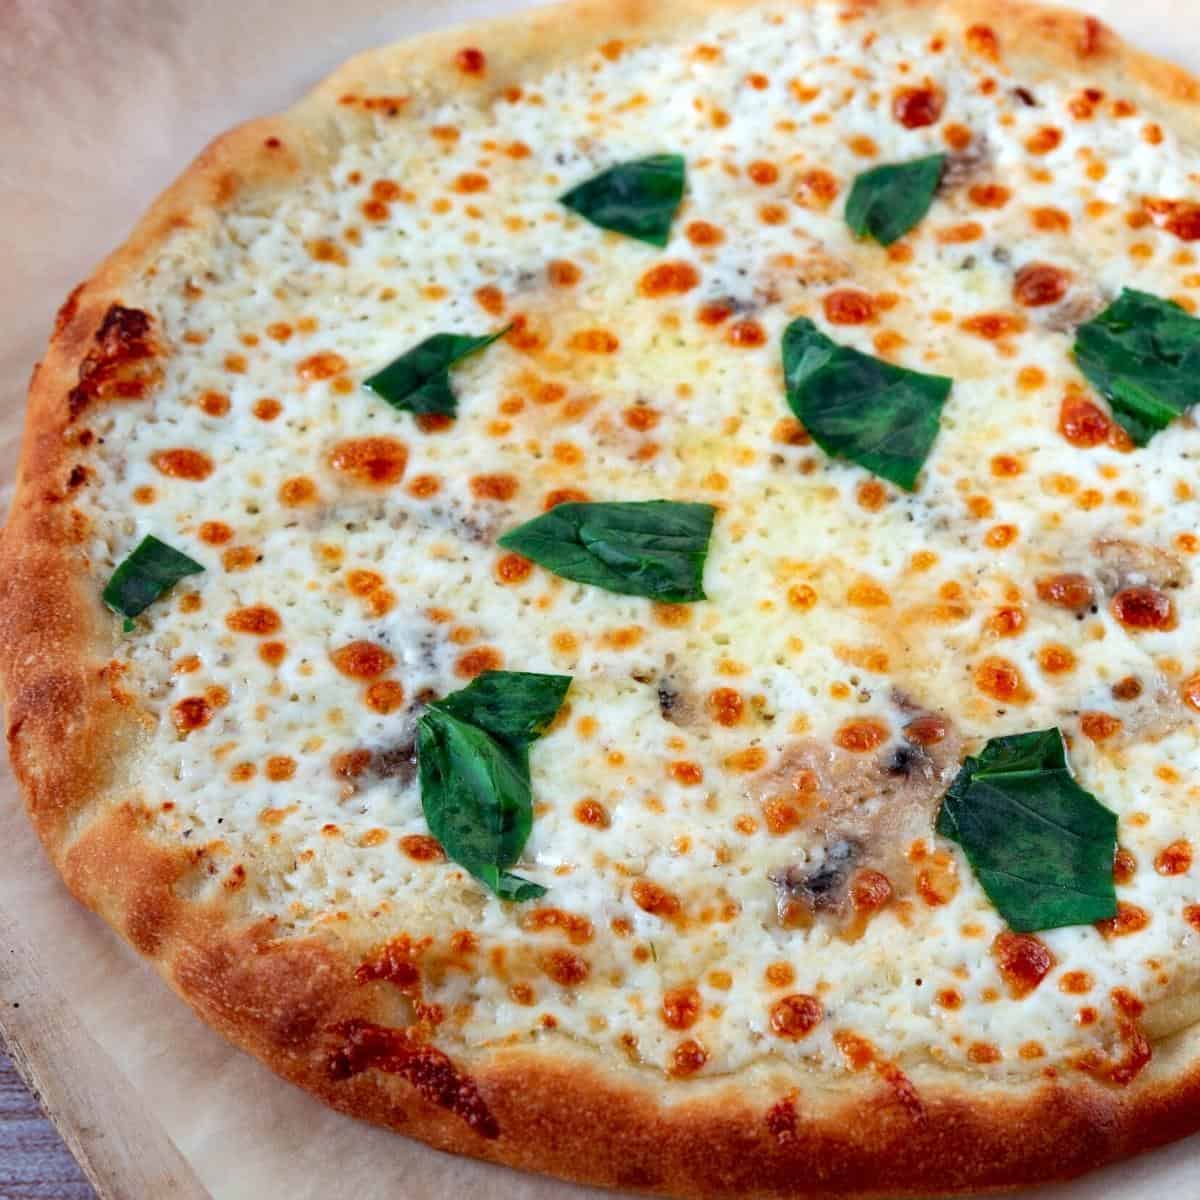 A pizza with white sauce baked fresh.